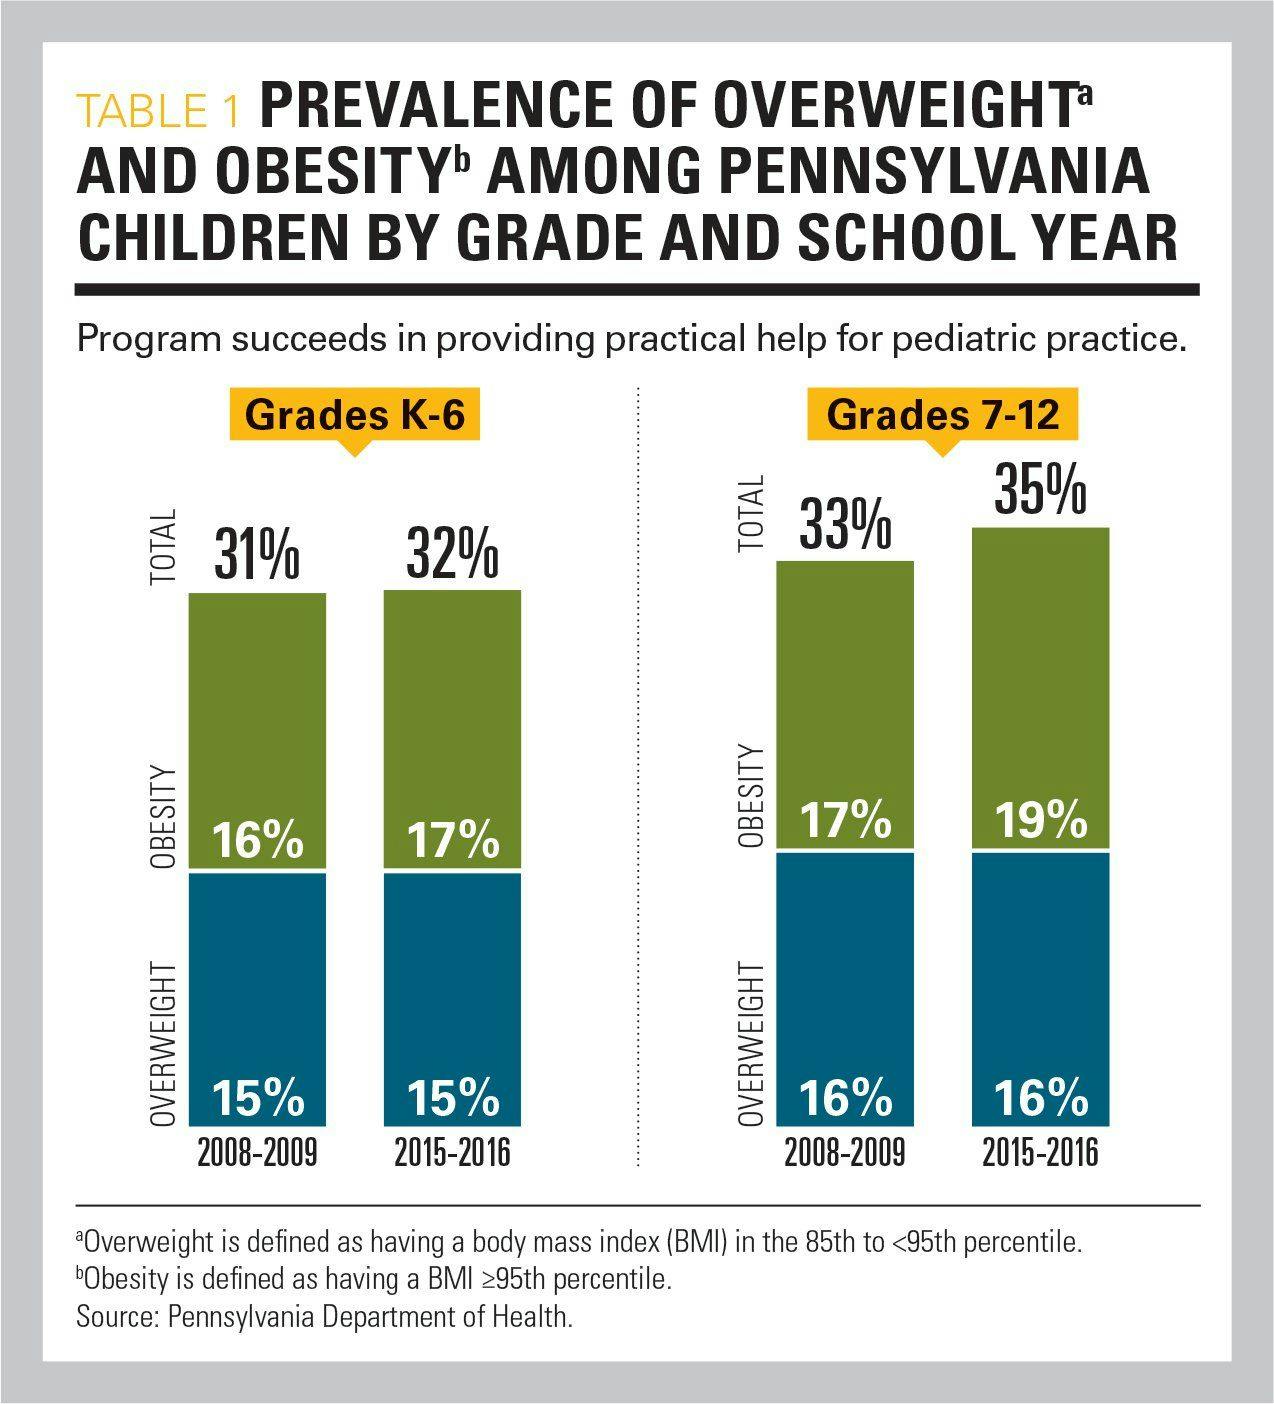 Prevalence of overweight and obesity among Pennsylvania children by grade and school year